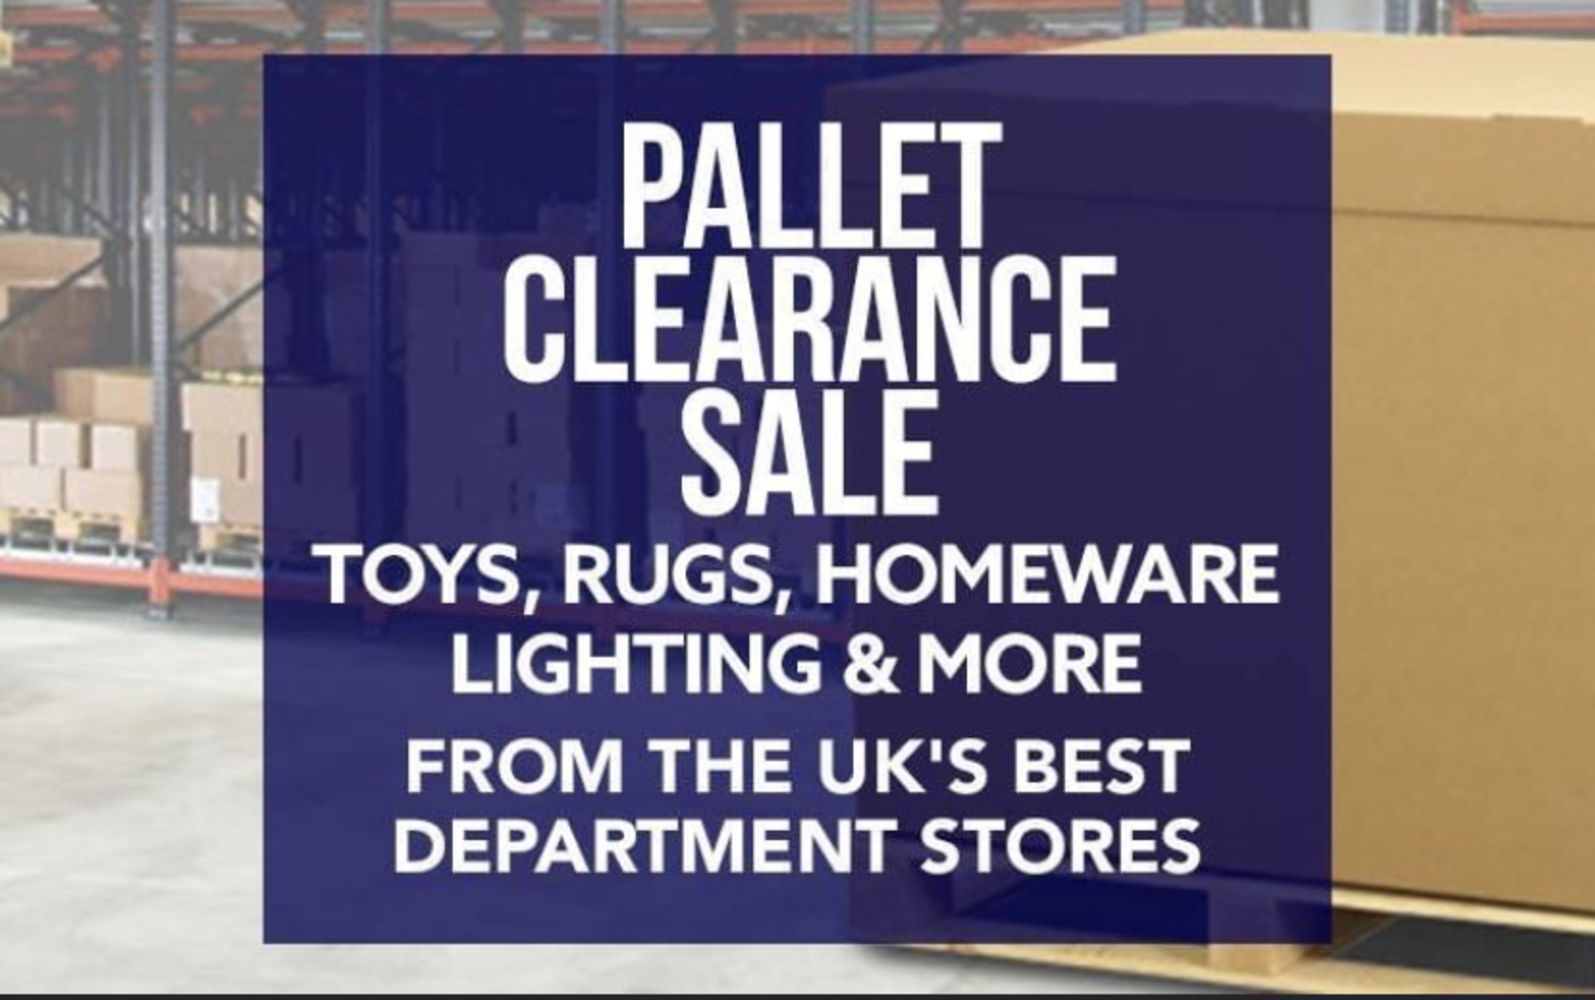 No Reserve - Pallet Clearance Sale! 22nd February 2021